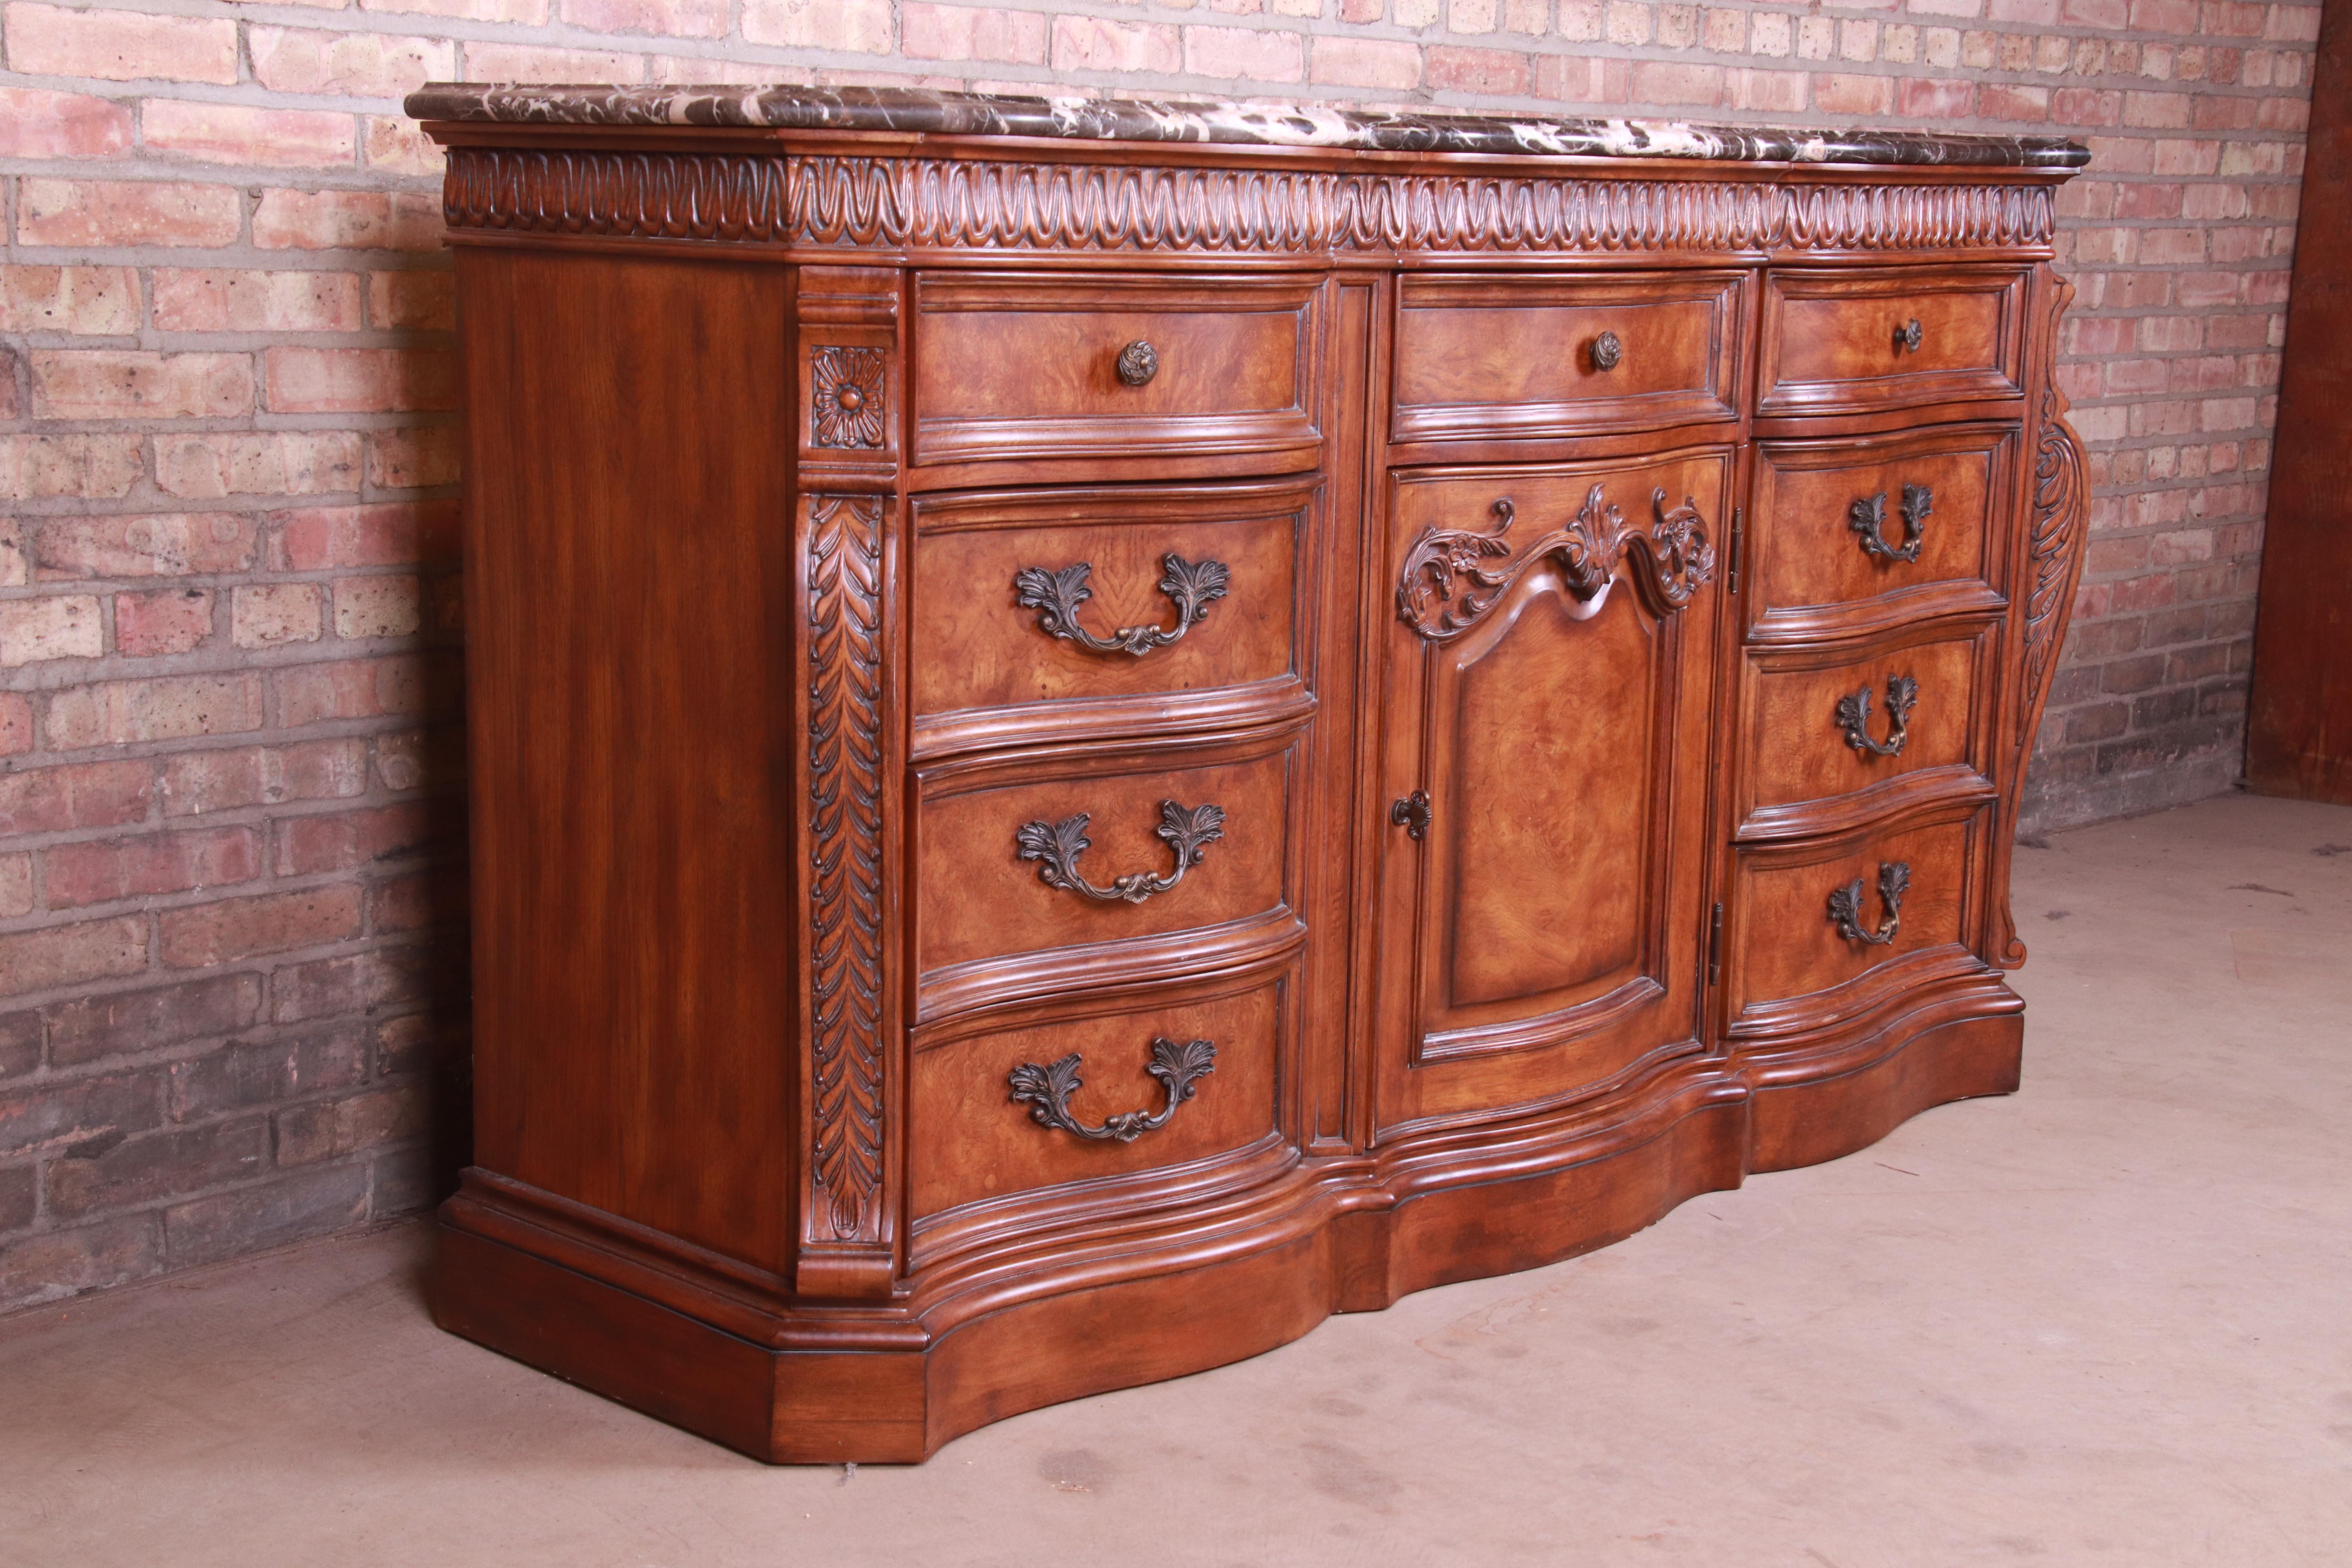 French Provincial Drexel Heritage Italian Provincial Burled Walnut Marble-Top Dresser or Sideboard